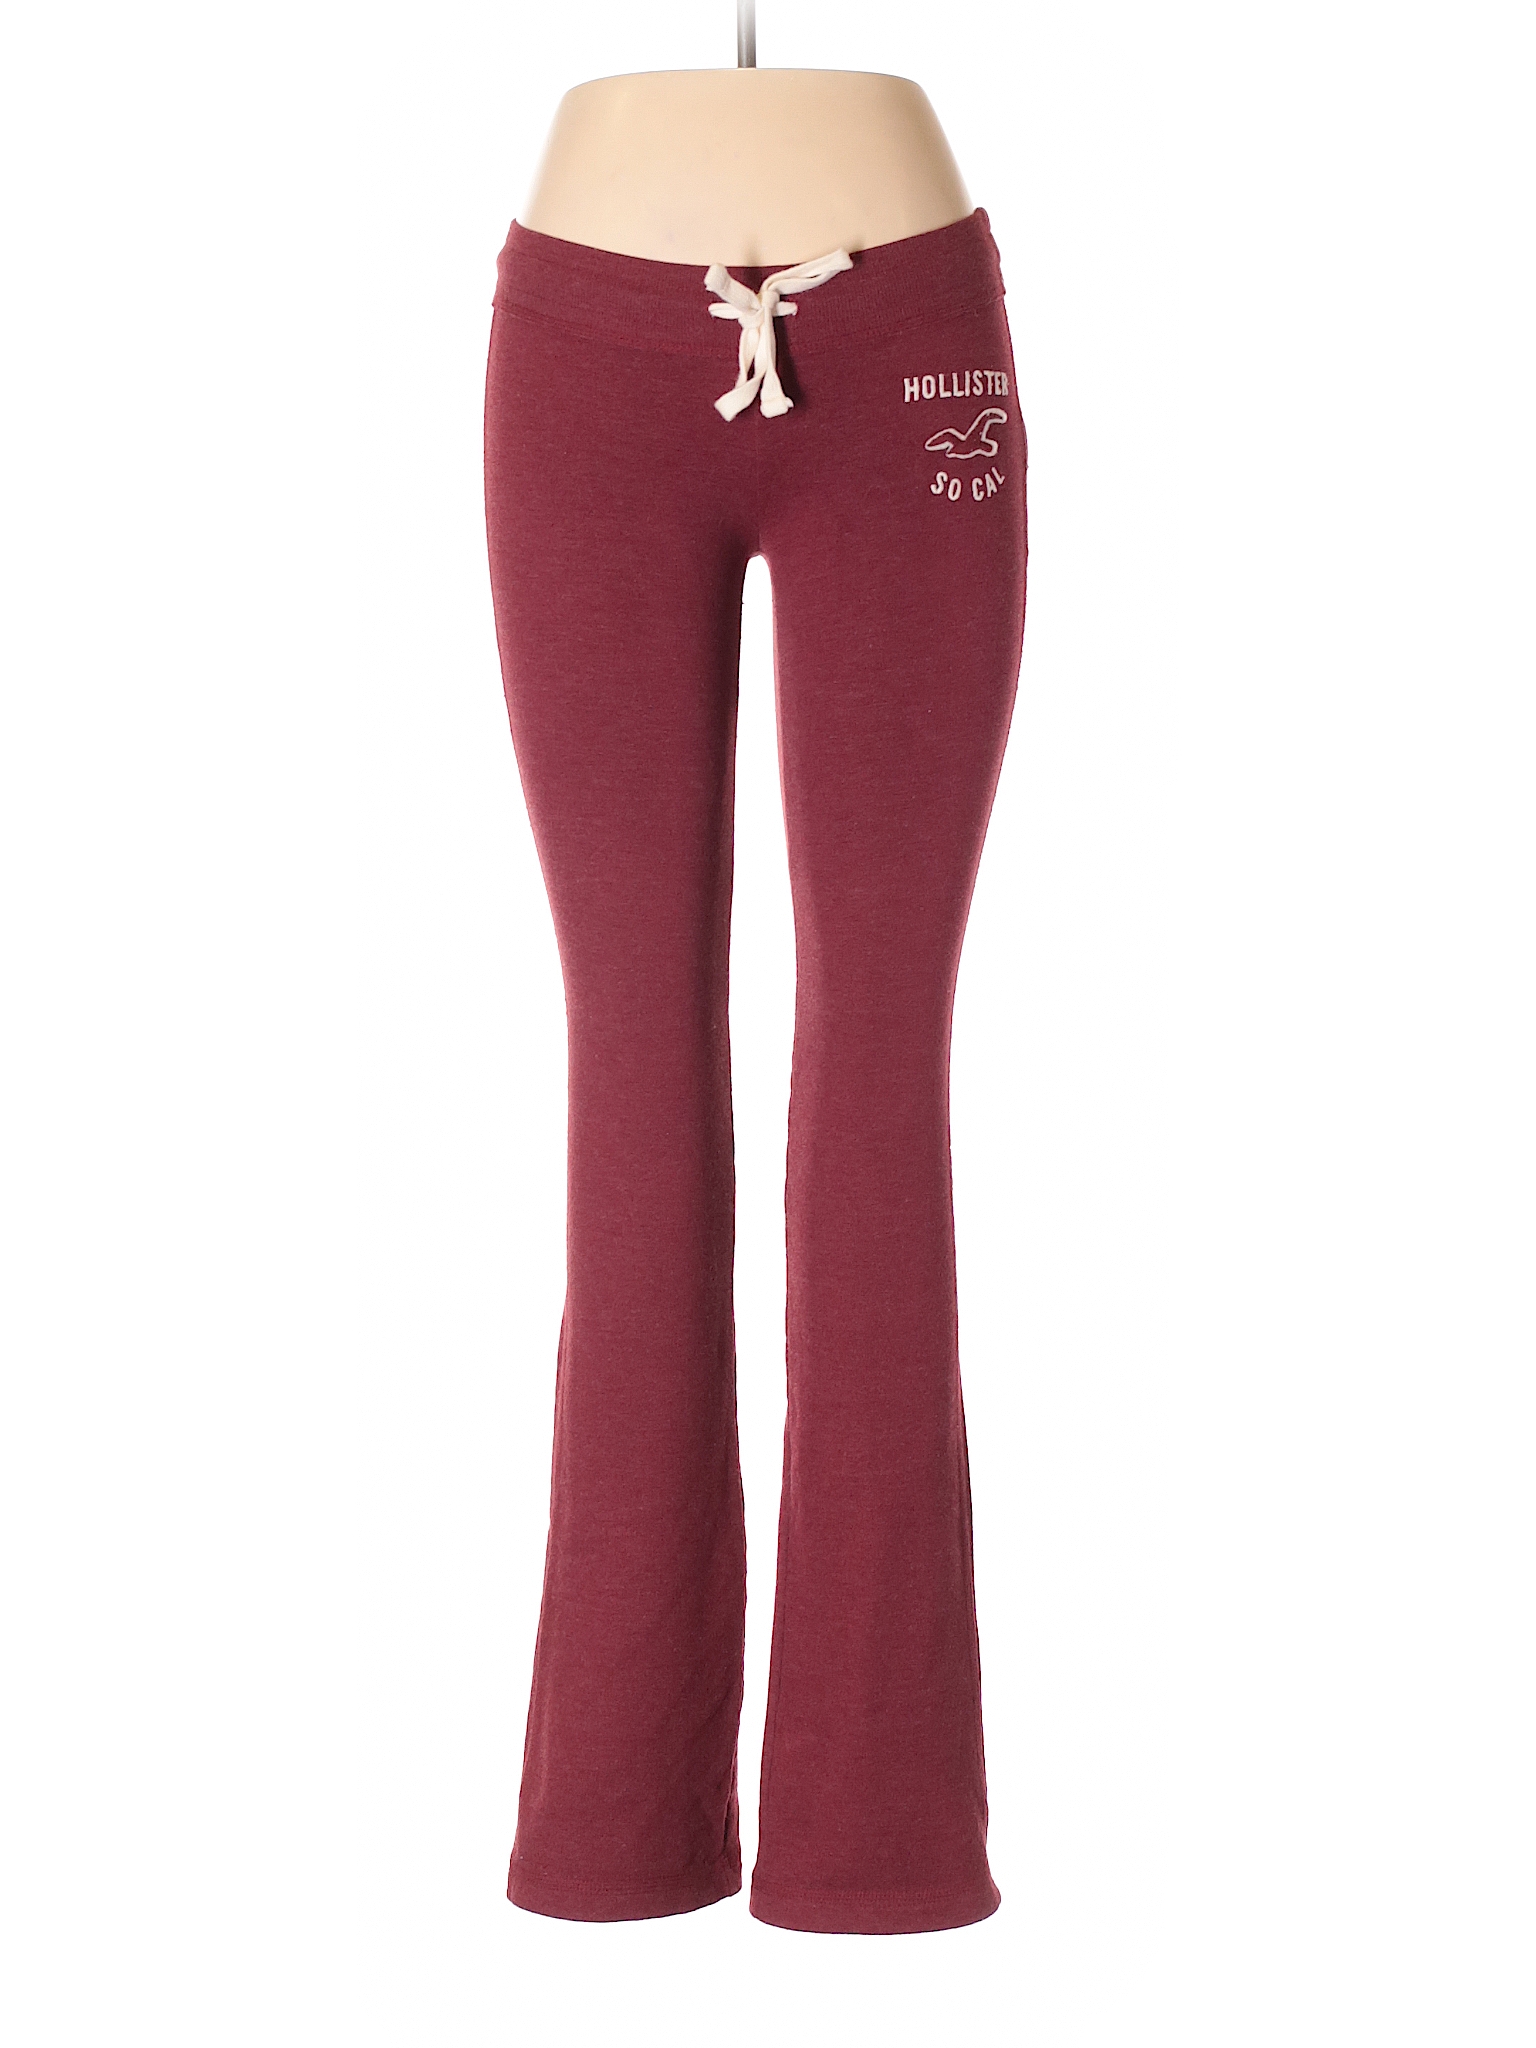 Hollister Graphic Burgundy Sweatpants Size XS - 62% off